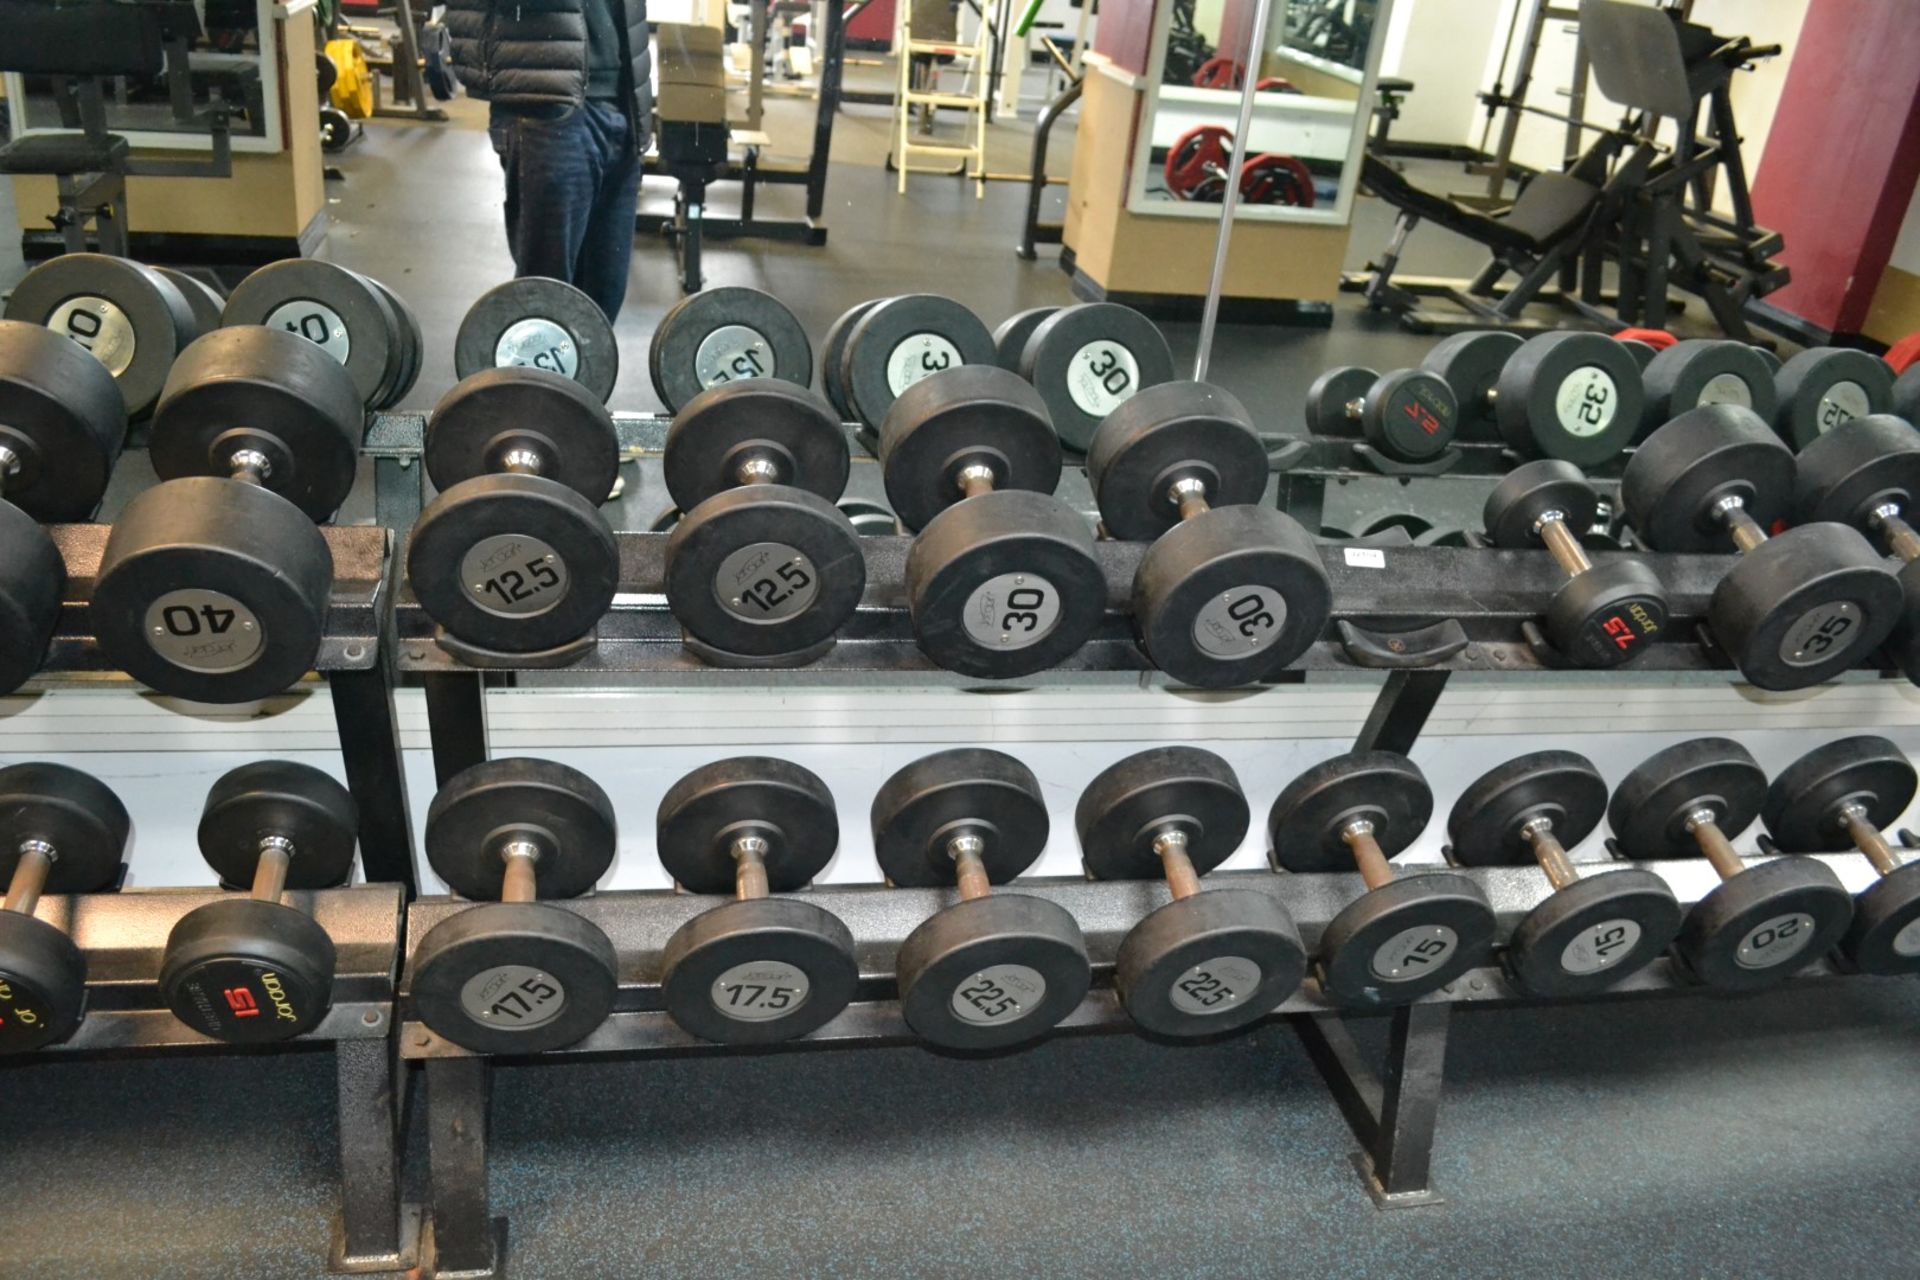 1 x Large Dumbells Rack With Approx 42 x Dumbell 5-40kg Weights - Ref: J2104/GFG - CL356 - Location: